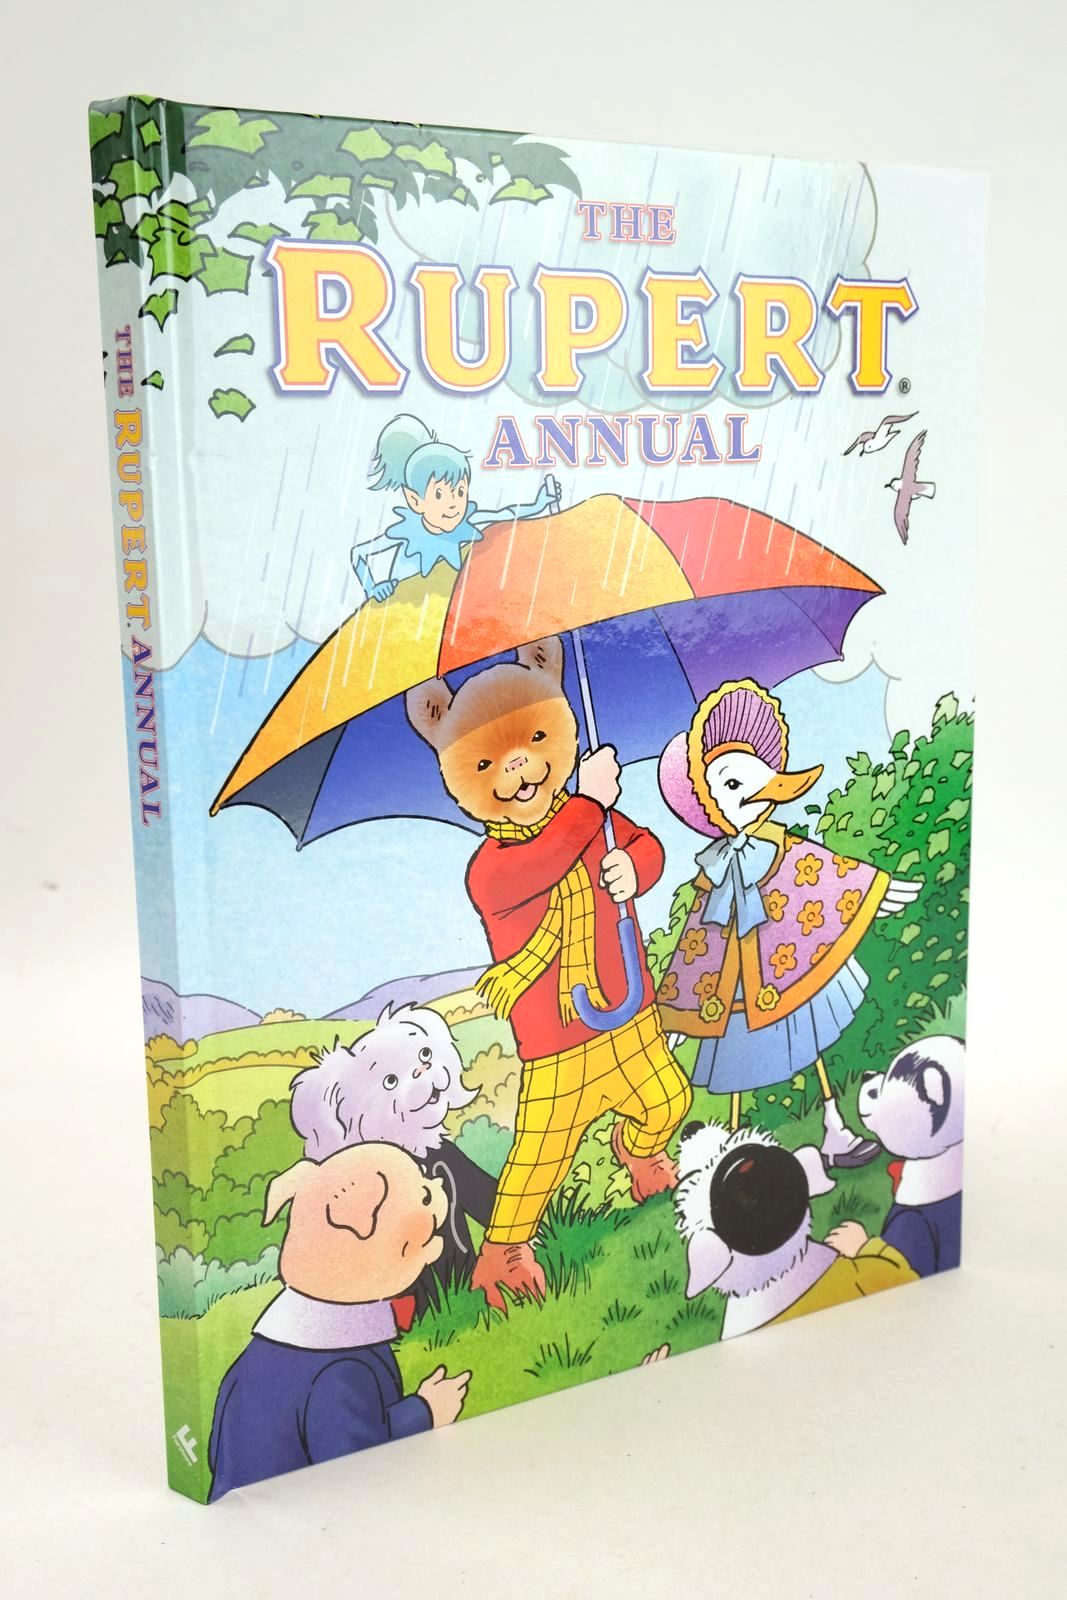 Photo of RUPERT ANNUAL 2022 illustrated by Bestall, Alfred Harrold, John Cubie, Alex Trotter, Stuart published by Farshore, Harper Collins (STOCK CODE: 1325831)  for sale by Stella & Rose's Books